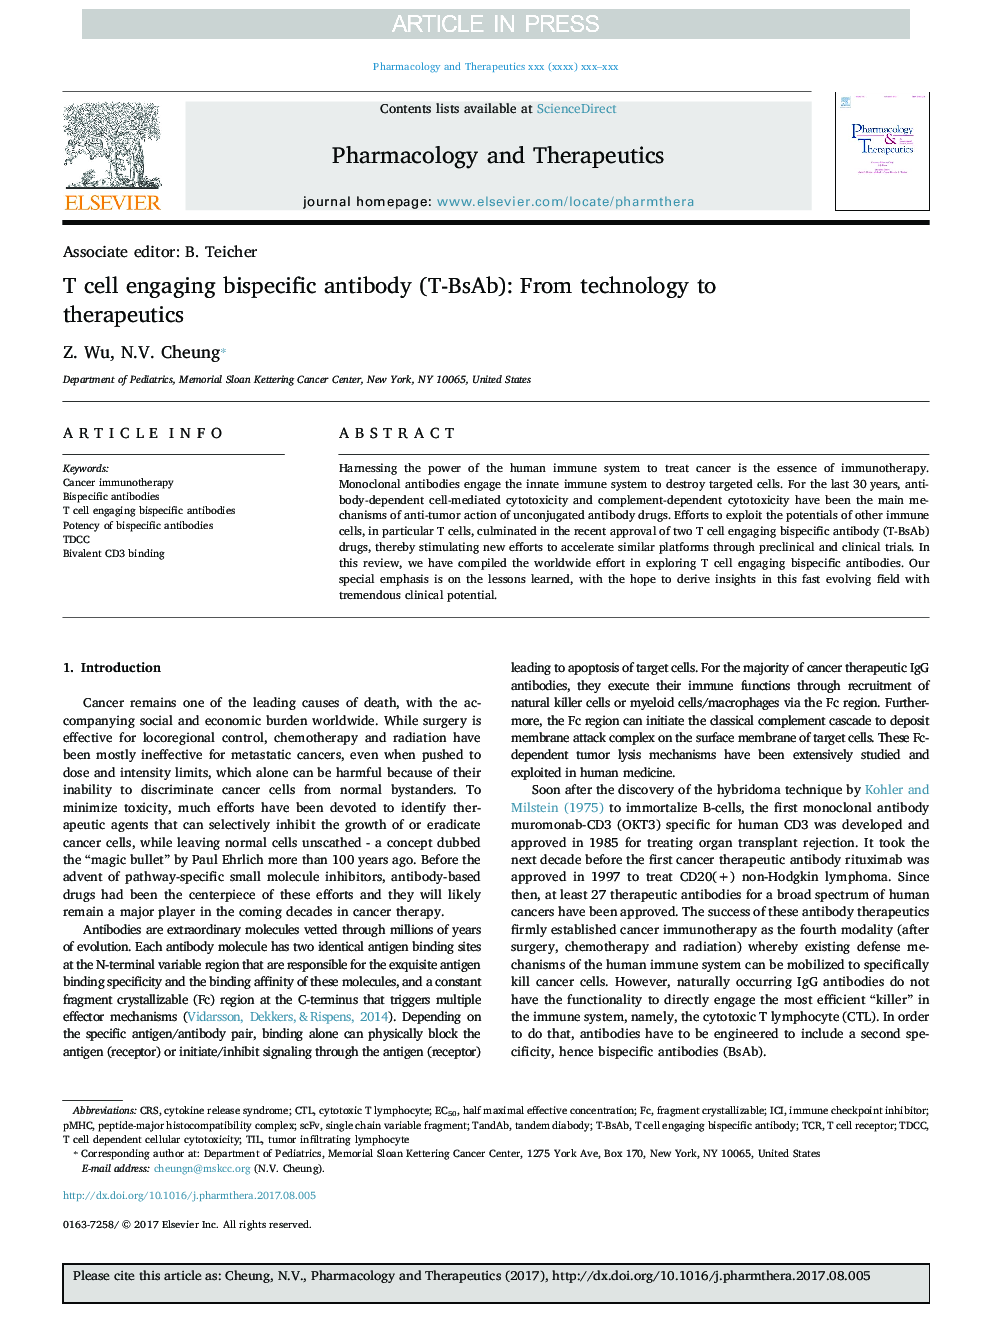 T cell engaging bispecific antibody (T-BsAb): From technology to therapeutics